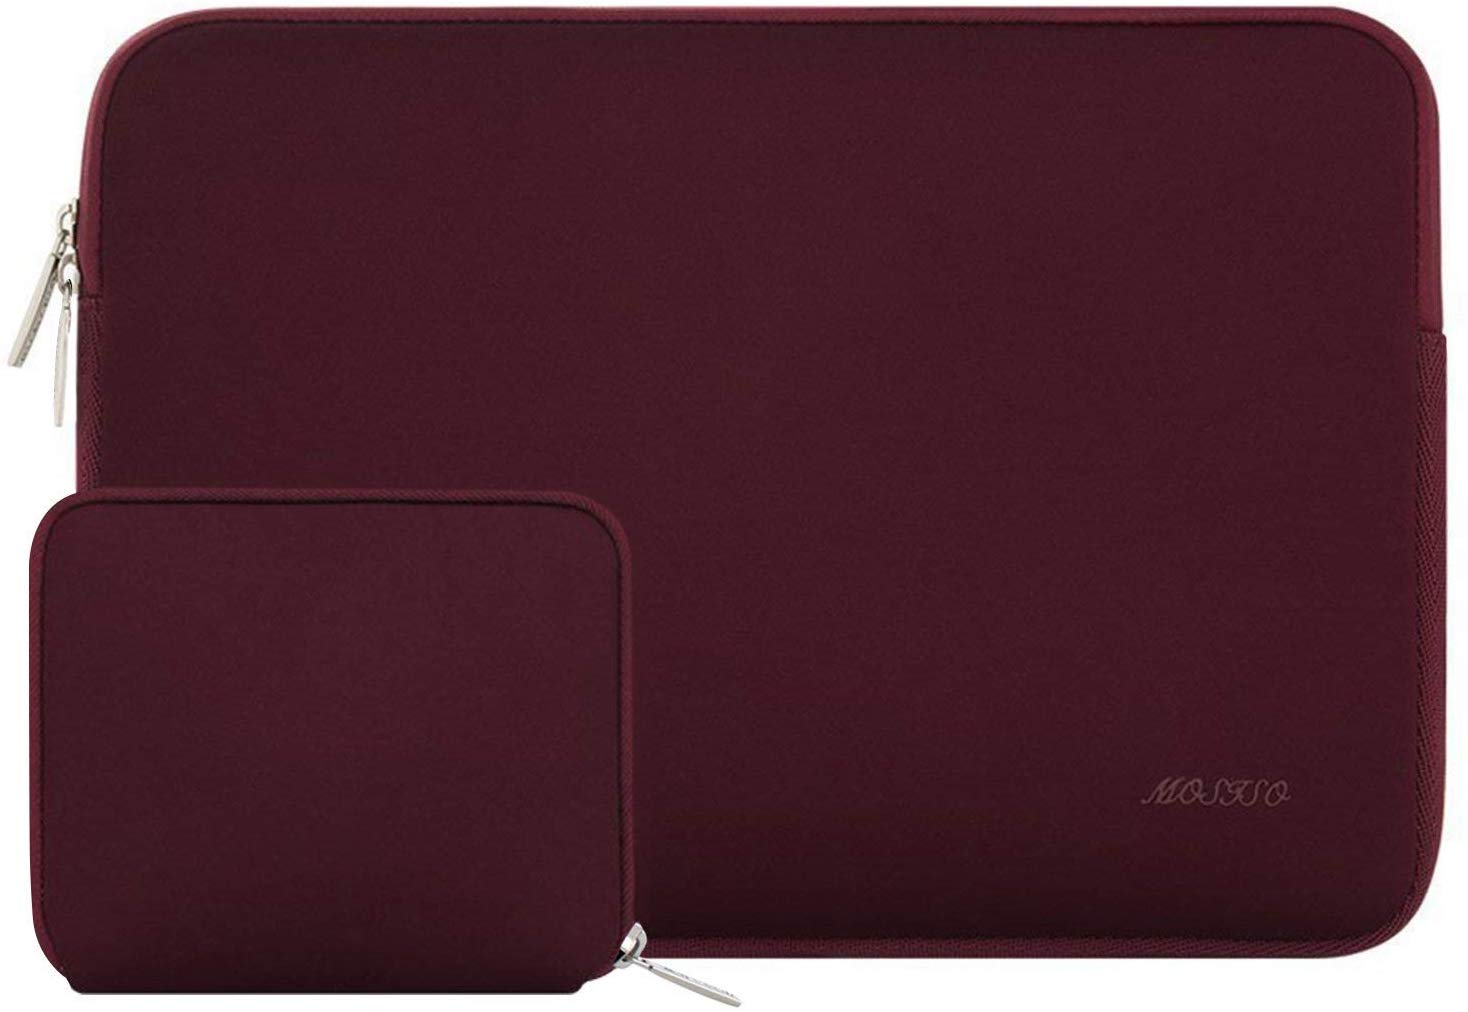 Wine Red 11.6-inch laptop sleeve